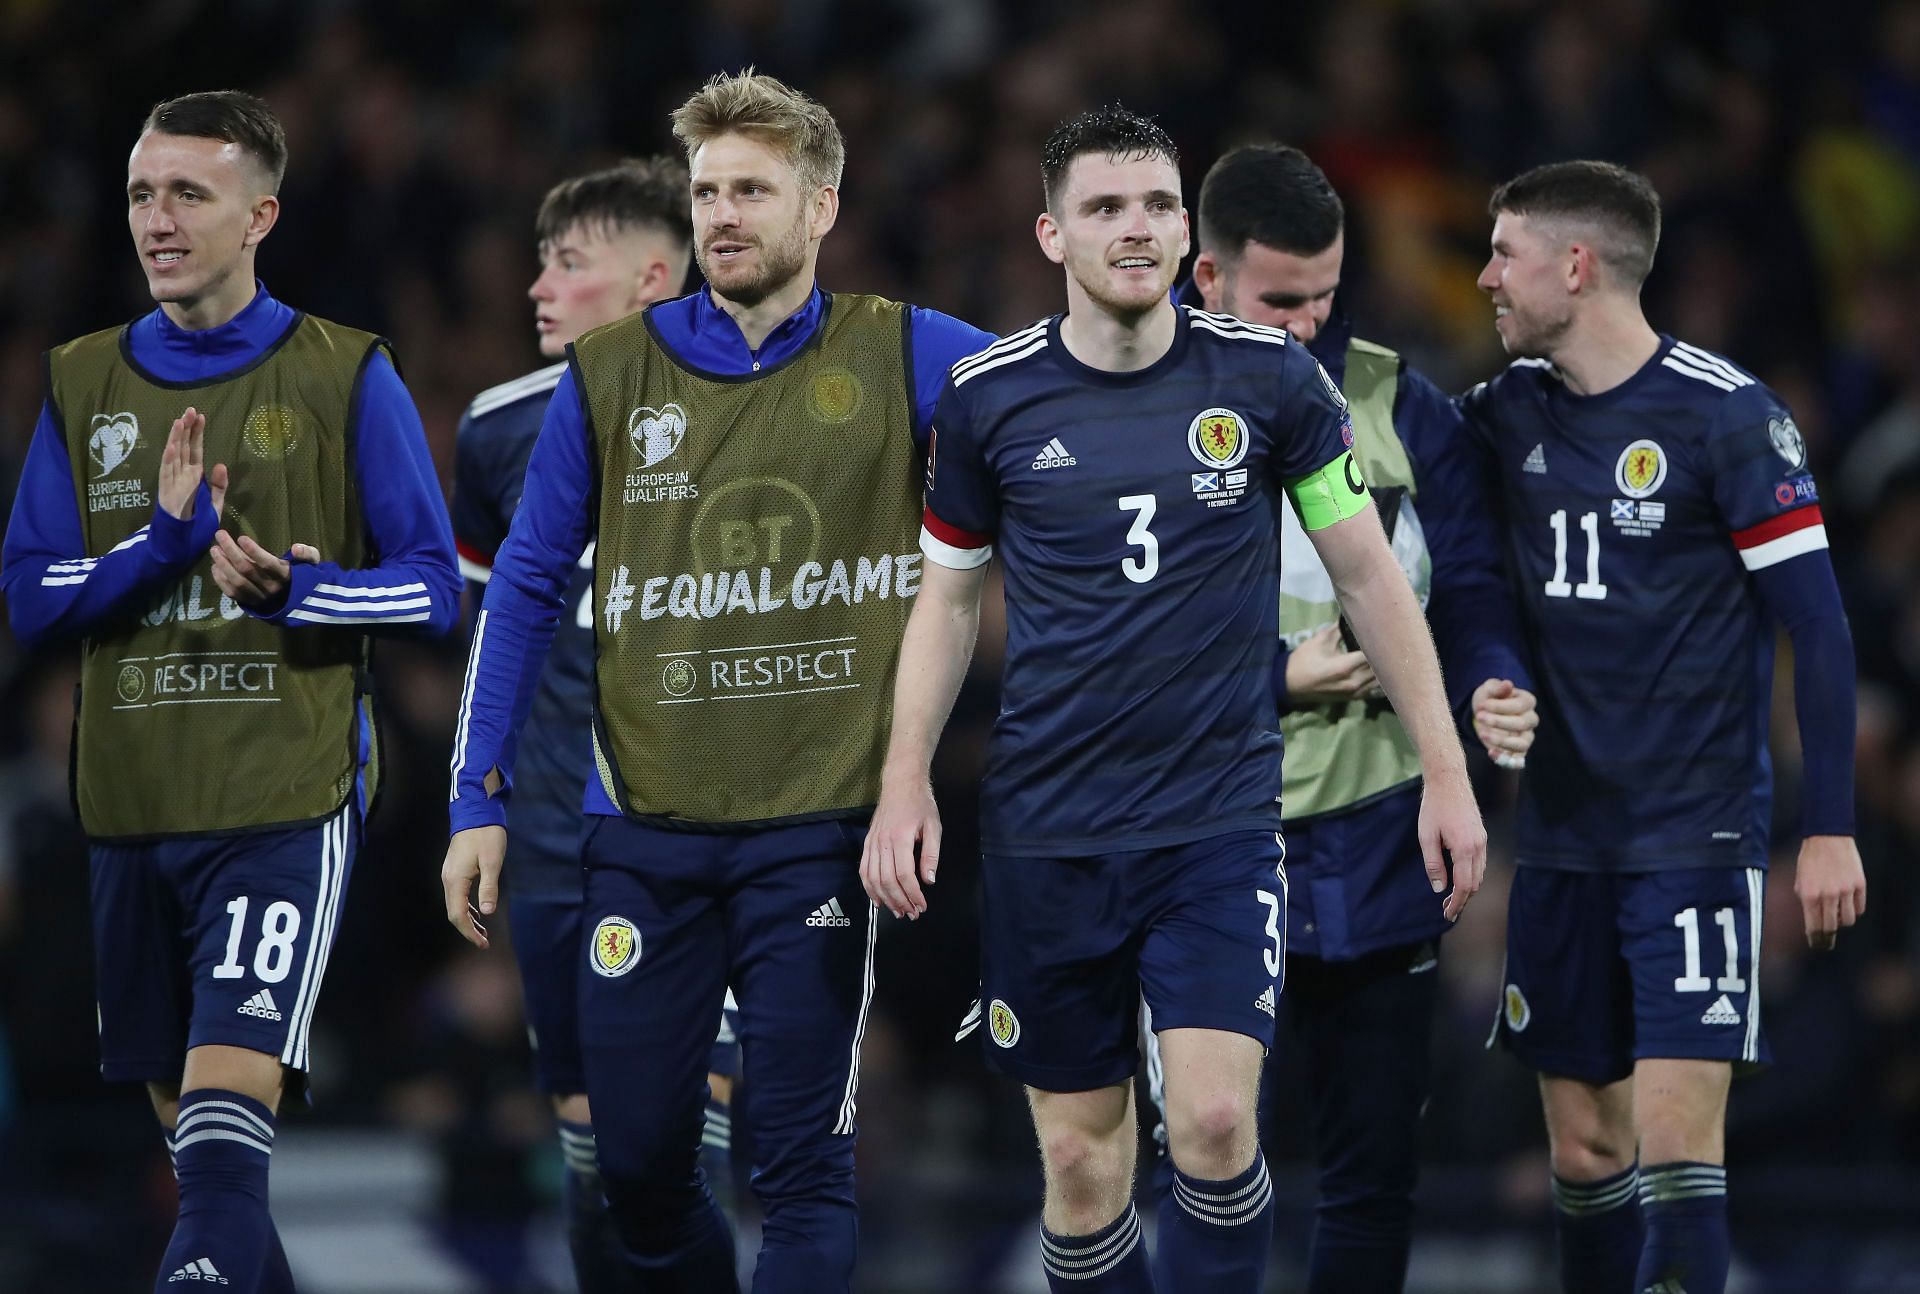 Scotland will face Moldova on Friday - 2022 FIFA World Cup Qualifiers